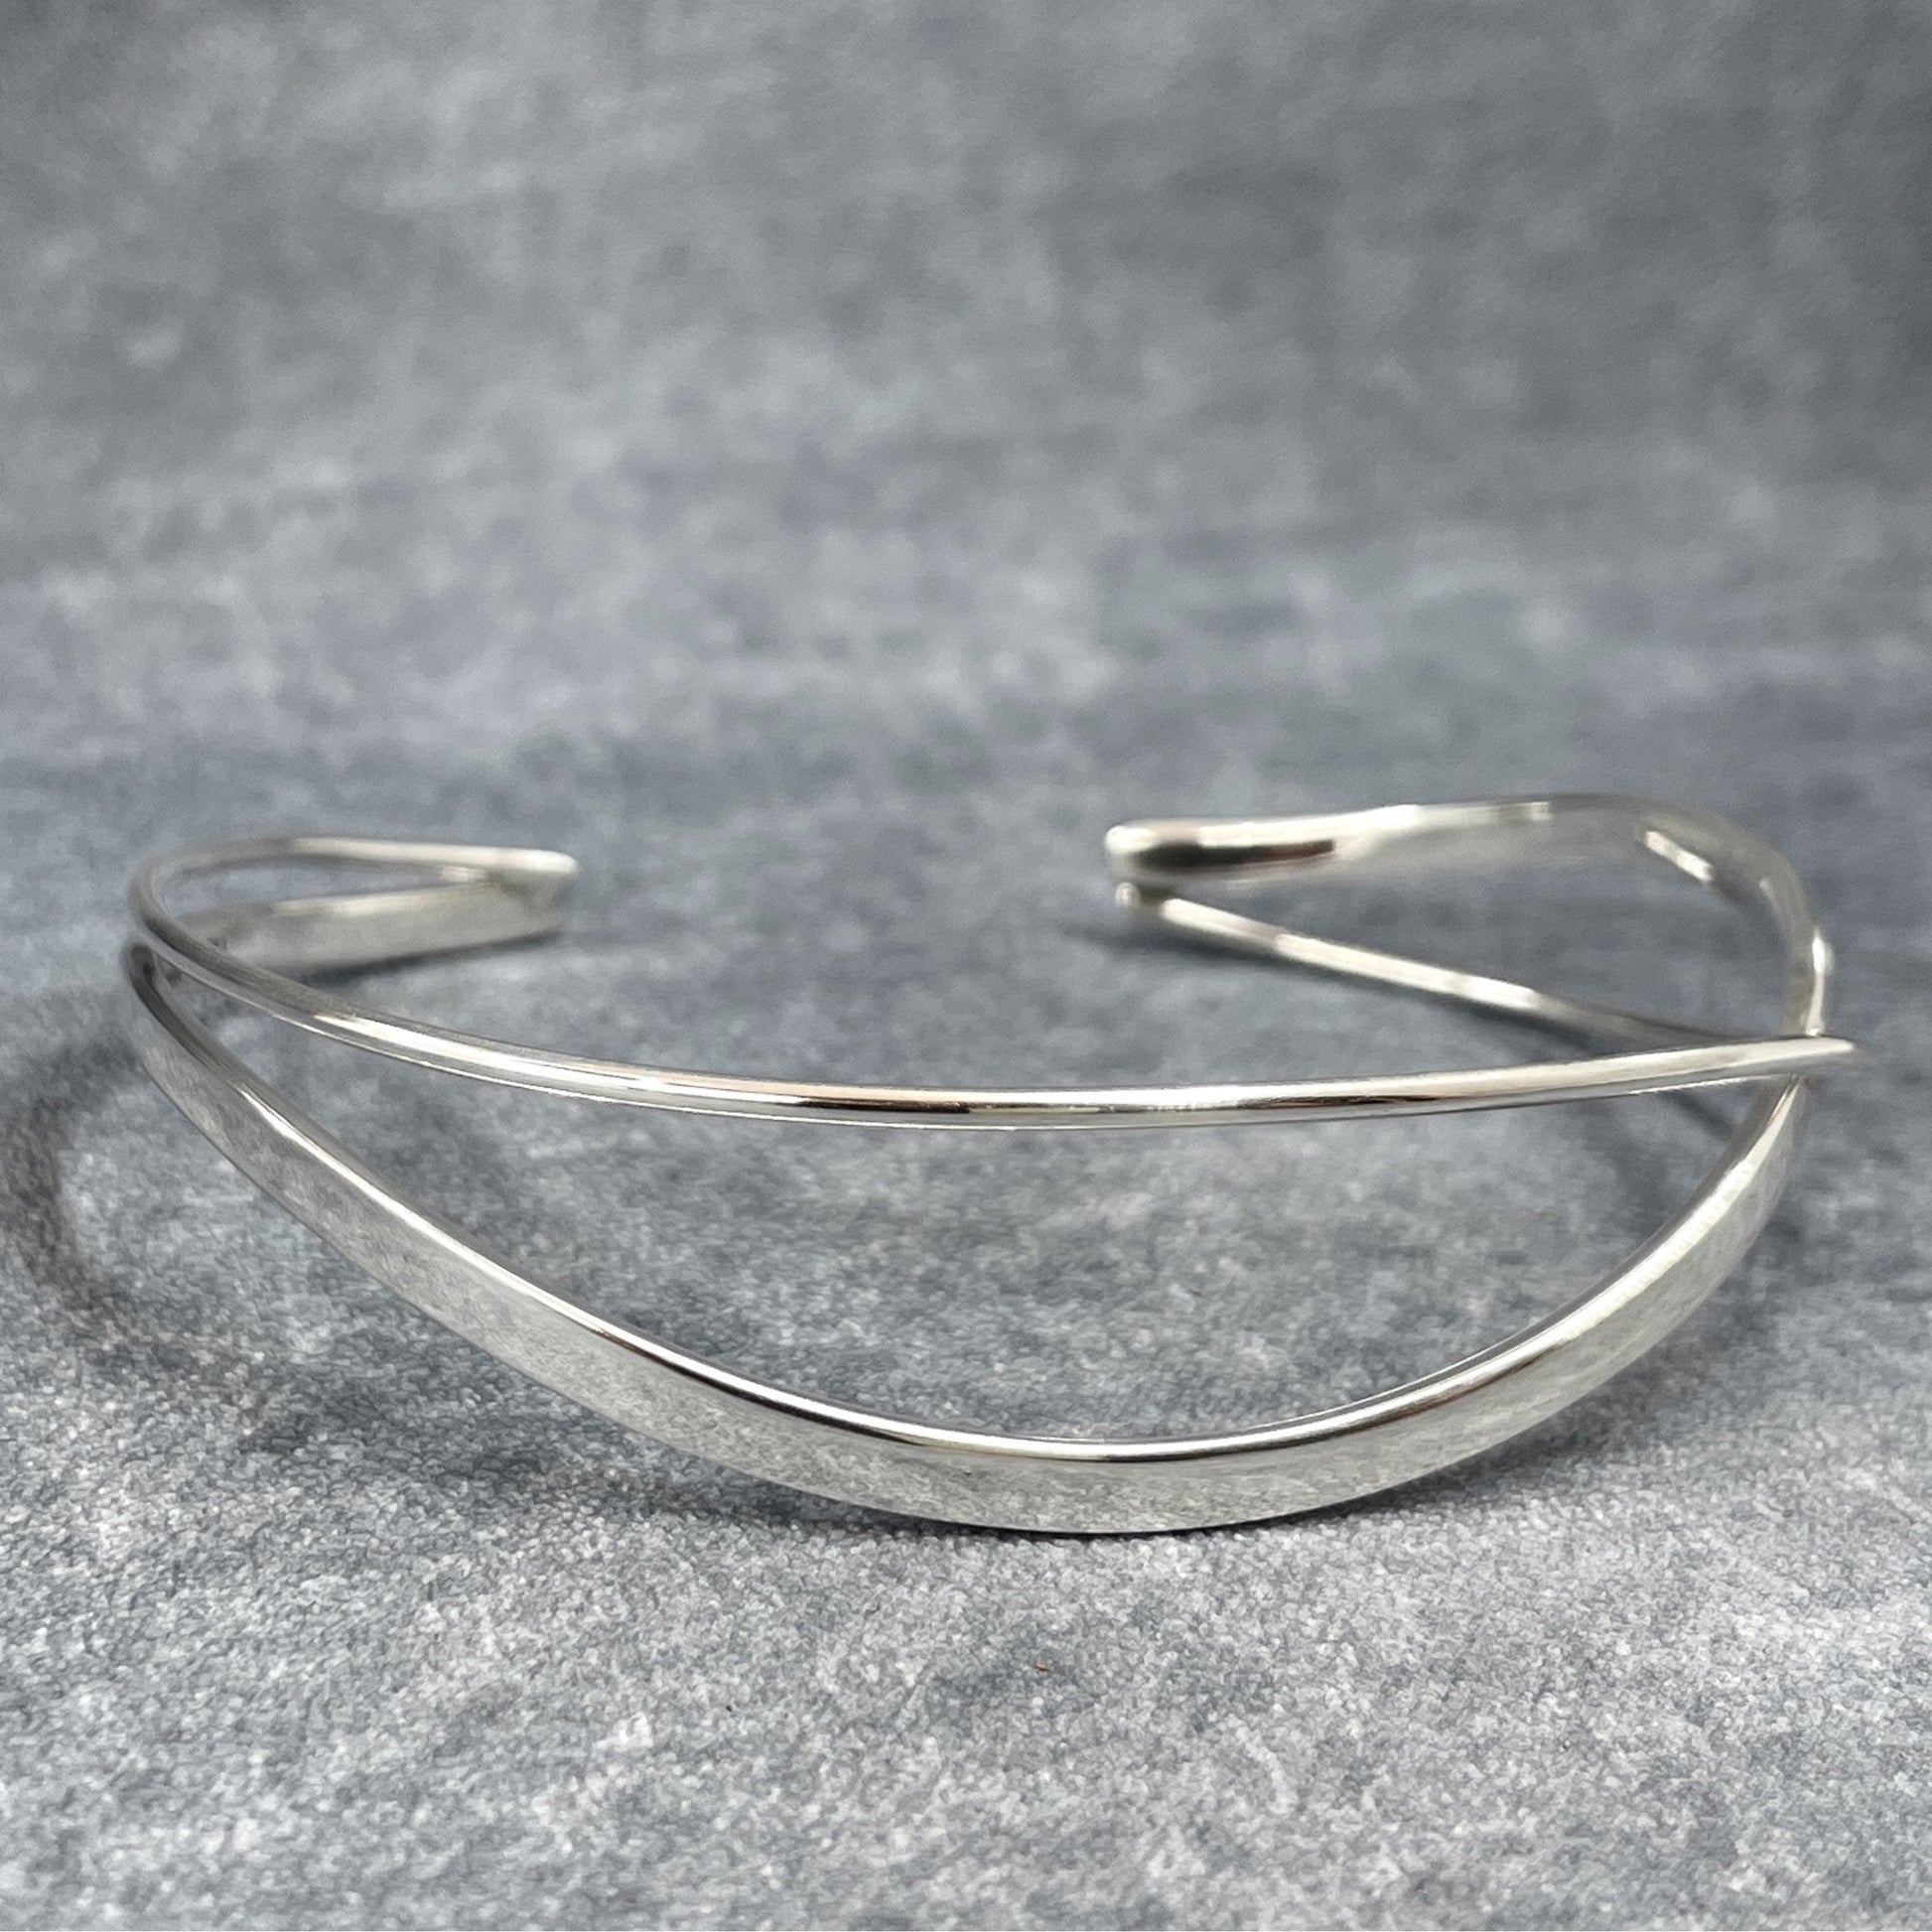 Uisce - Double Wave Cuff Silver Bracelet, meticulously handcrafted with sterling silver and boasting a striking high-polished finish. Each cuff features a captivating Double Wave design, accentuated by polished silver. This handmade piece offers a thickness of 1.5 millimeters and can be gently adjusted for a perfect fit.</p> <p>Measuring 14.5 cm on the inner length and 15.5 cm on the outer length from end to end, with a width of 1.2 cm at its widest point and a 3 cm gap. Ireland.